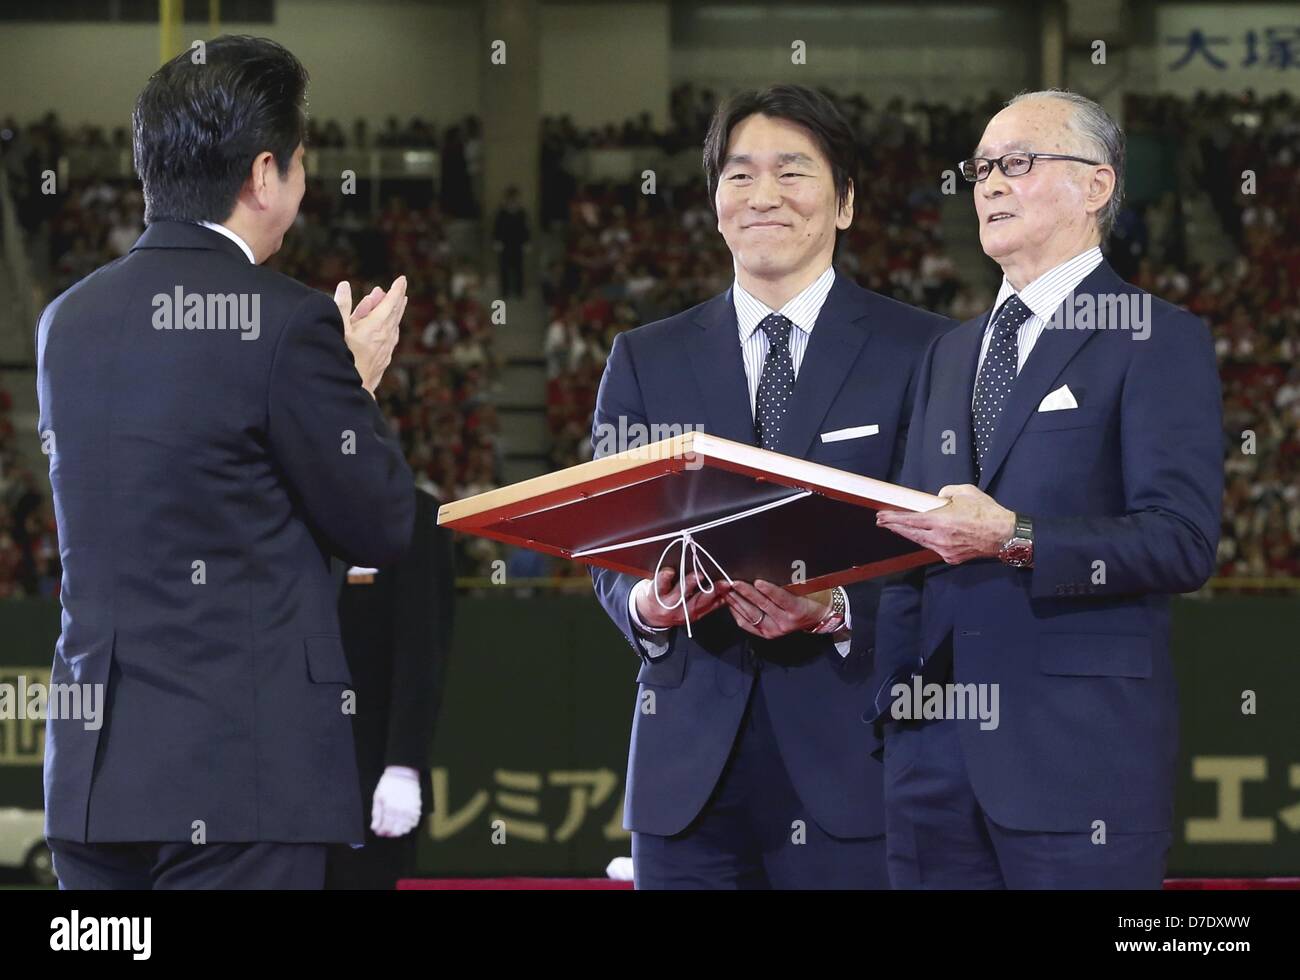 May 5, 2013 - Tokyo, Japan - Former Yomiuri Giants slugger Shigeo Nagashima, right, accompanied by former Giants and New York Yankees outfielder Hideki Matsui, center, holds the People's Honor Award presented by Prime Minister Shinzo Abe, left, at the Tokyo Dome in Tokyo, Sunday, May 5, 2013. Matsui and his former manager with the Giants, Nagashima, received the award, which is bestowed on those who have made significant achievements in their careers and are beloved by the public. (Credit Image Â©Tsuyoshi Matsumoto, Pool)/Jana Press/ZUMApress.com) (Credit Image: © Yoshikazu Okunishi/Jana Press Stock Photo